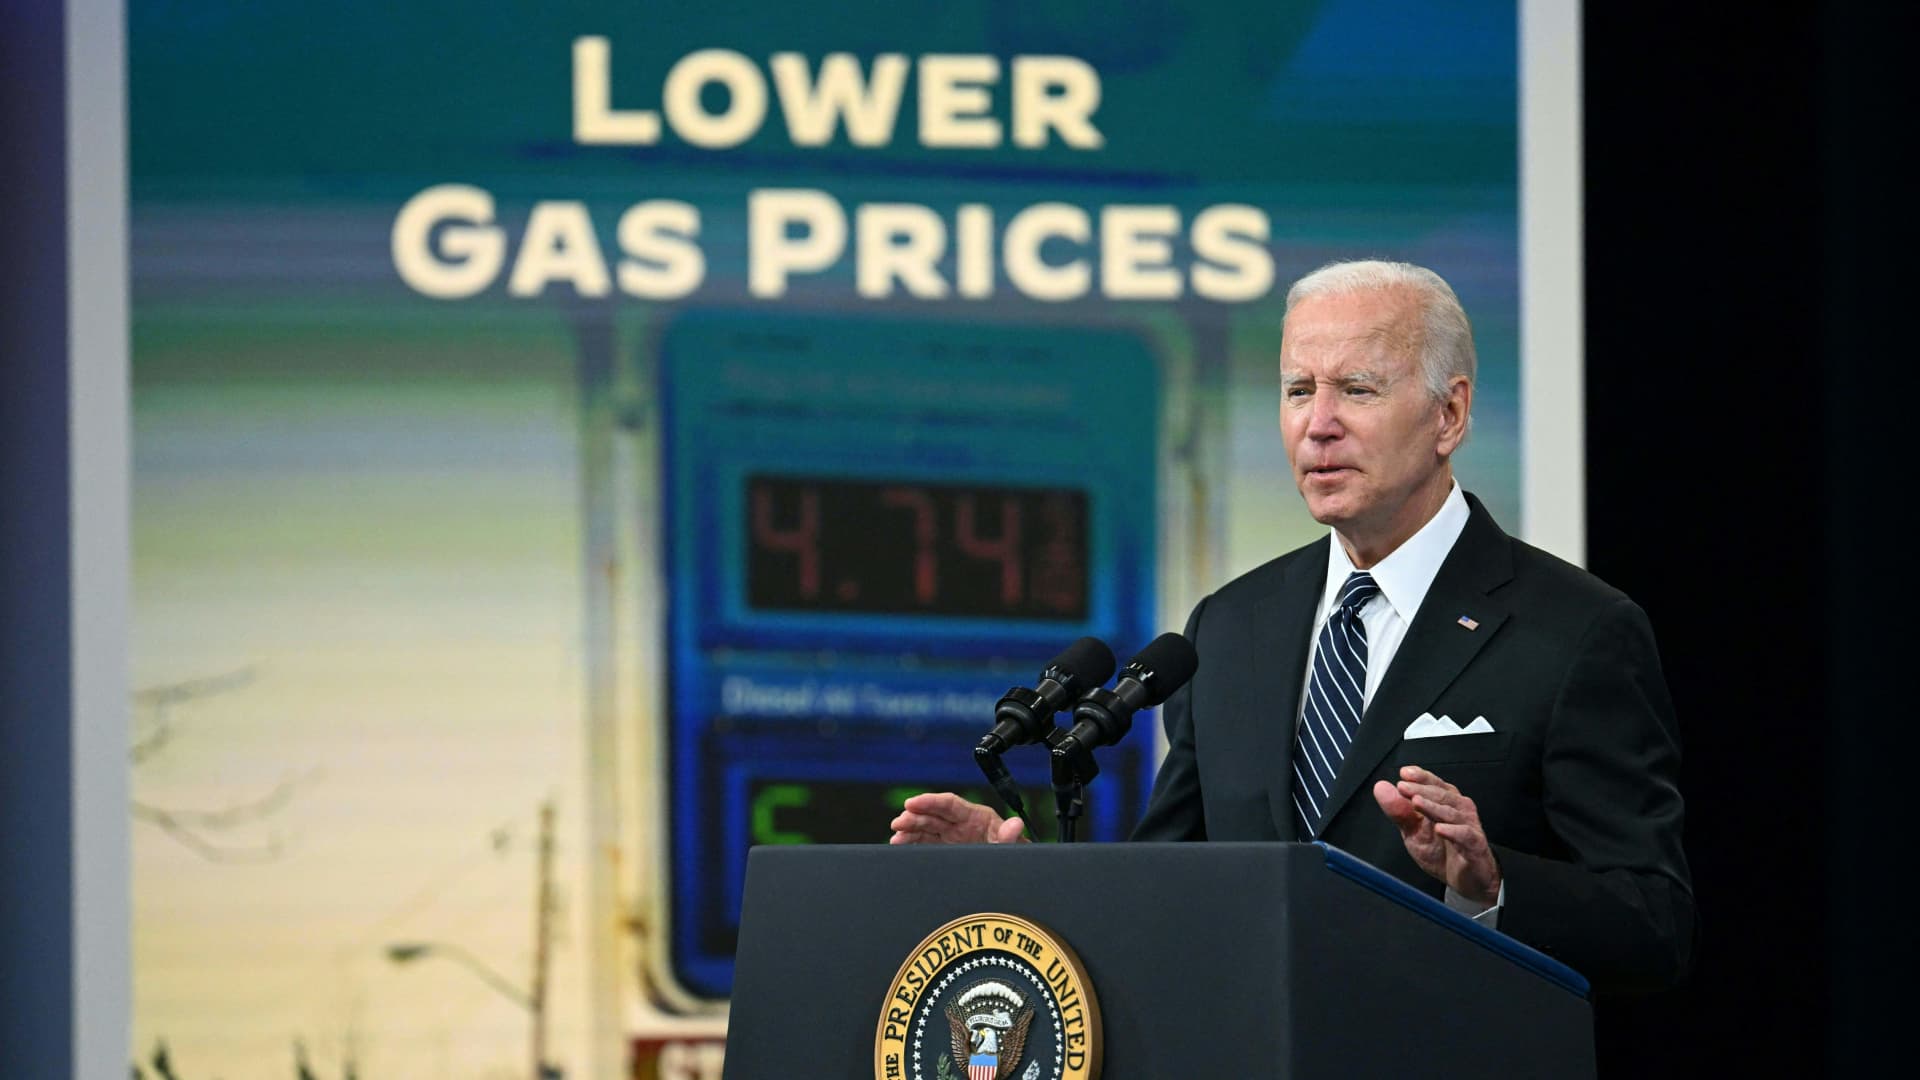 Biden to release 1 million barrels of gas to reduce prices at the pump [Video]